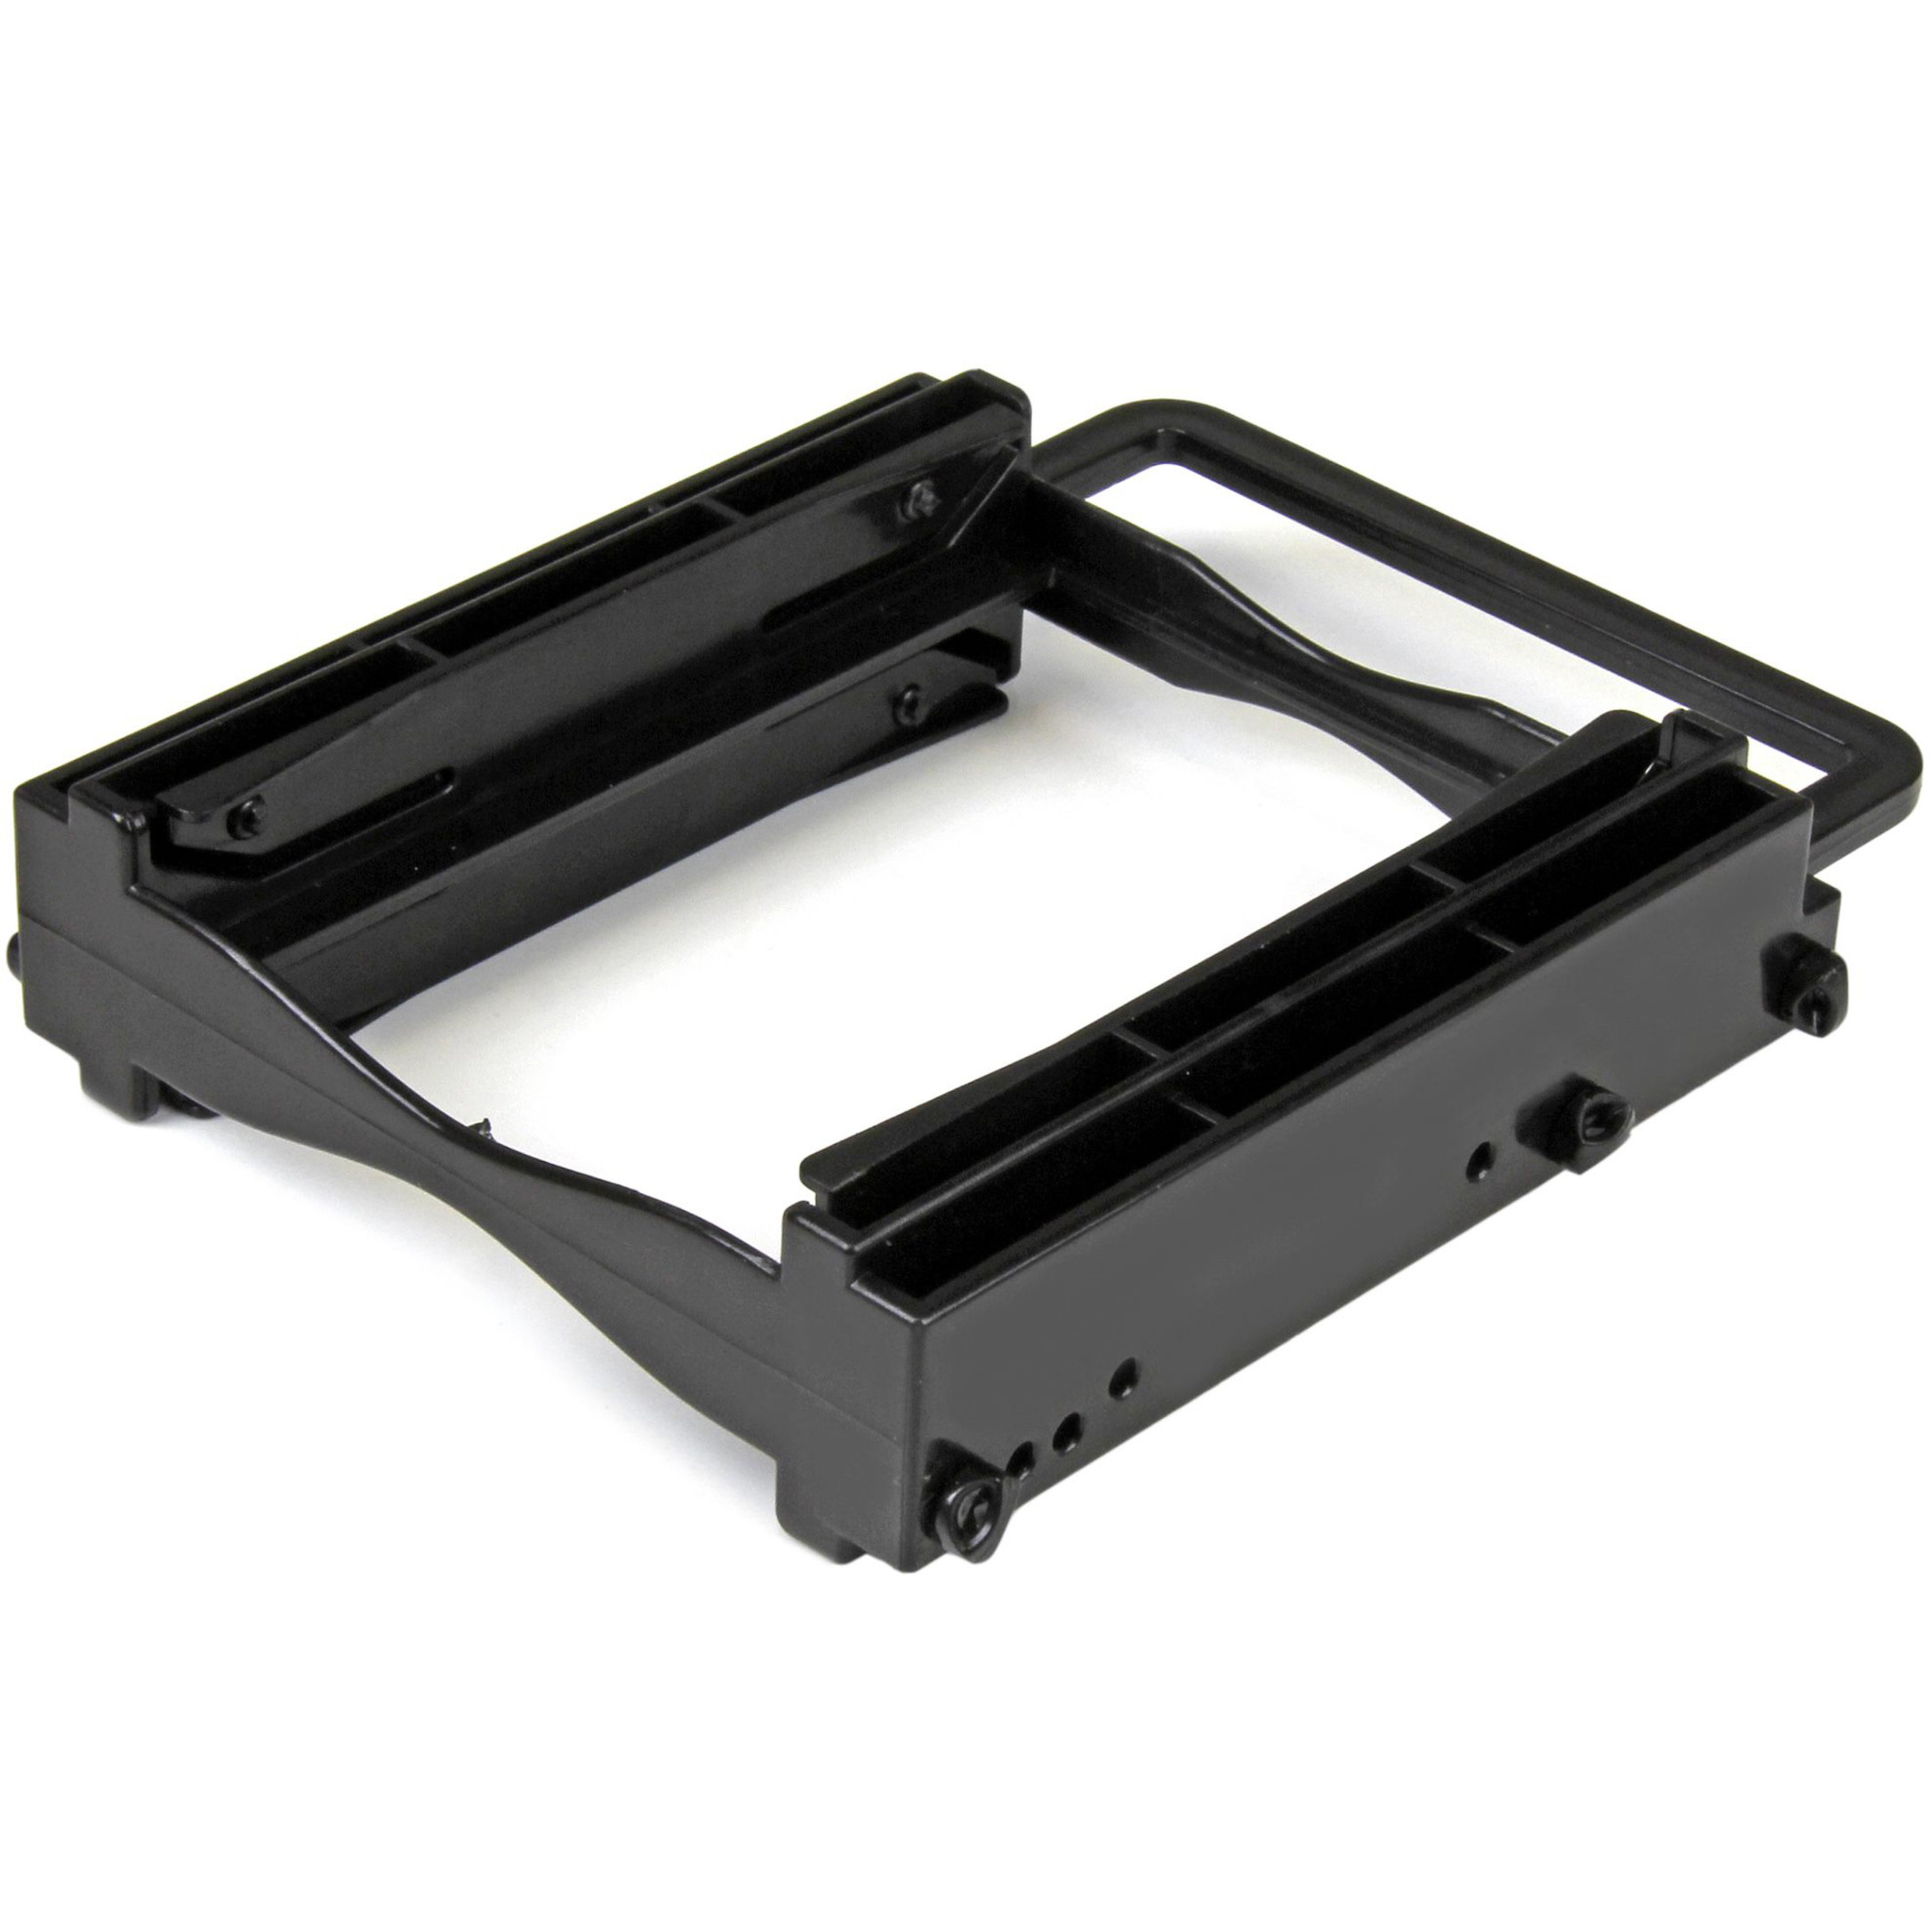 Startech .com Dual 2.5" SSD/HDD Bracket for 3.5" Drive BayTool-Less Installation2-Drive Adapter for Desktop Computer... - Corporate Armor